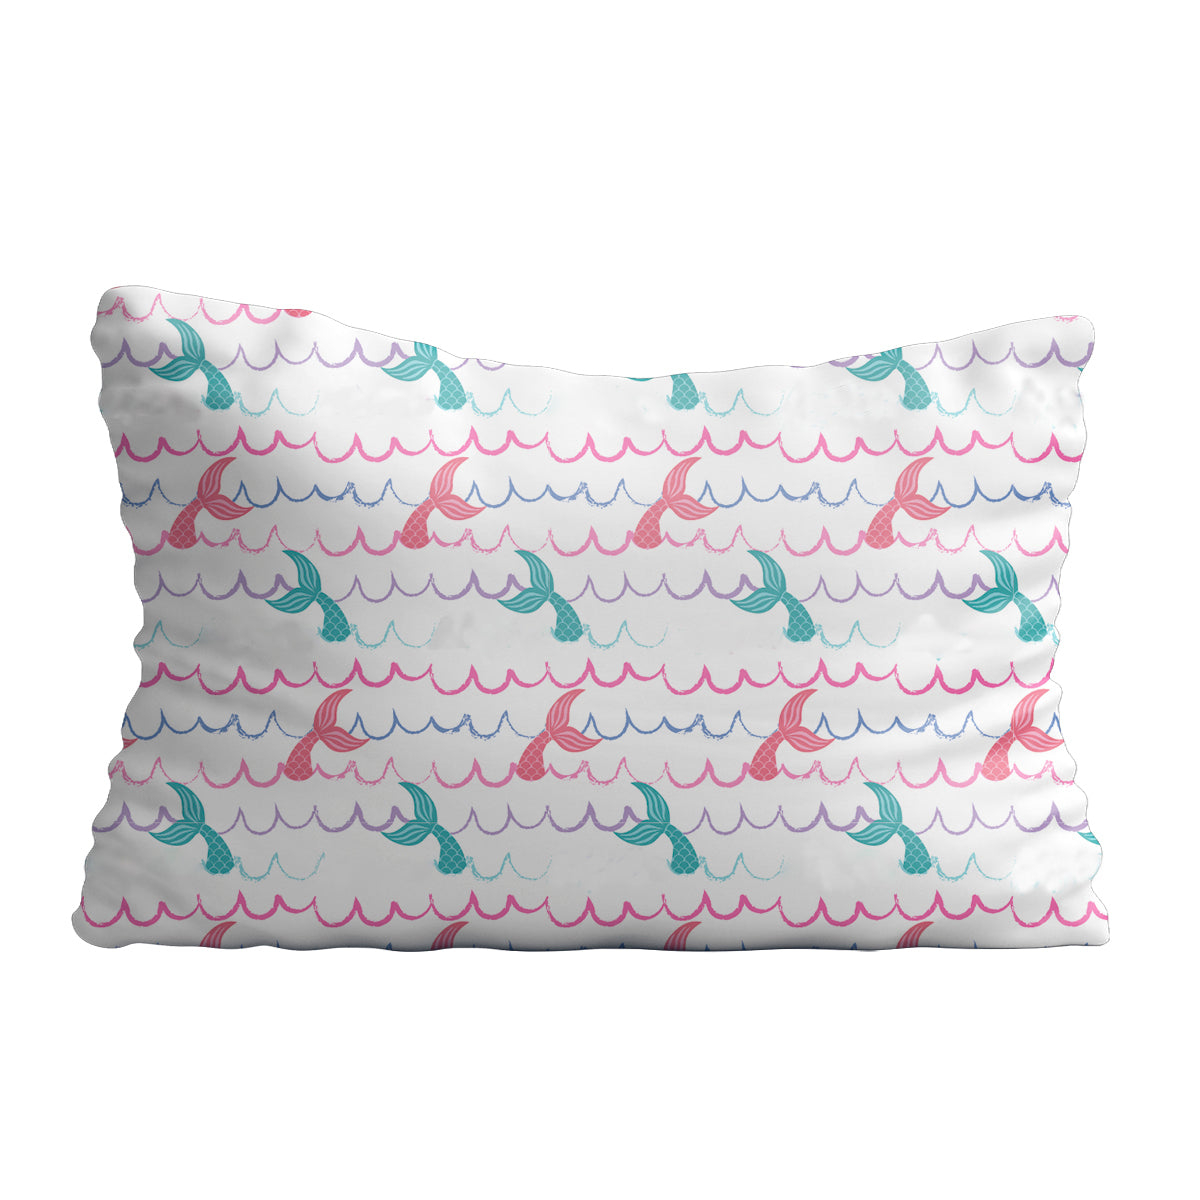 Mermaid and name print white pillow case - Wimziy&Co.